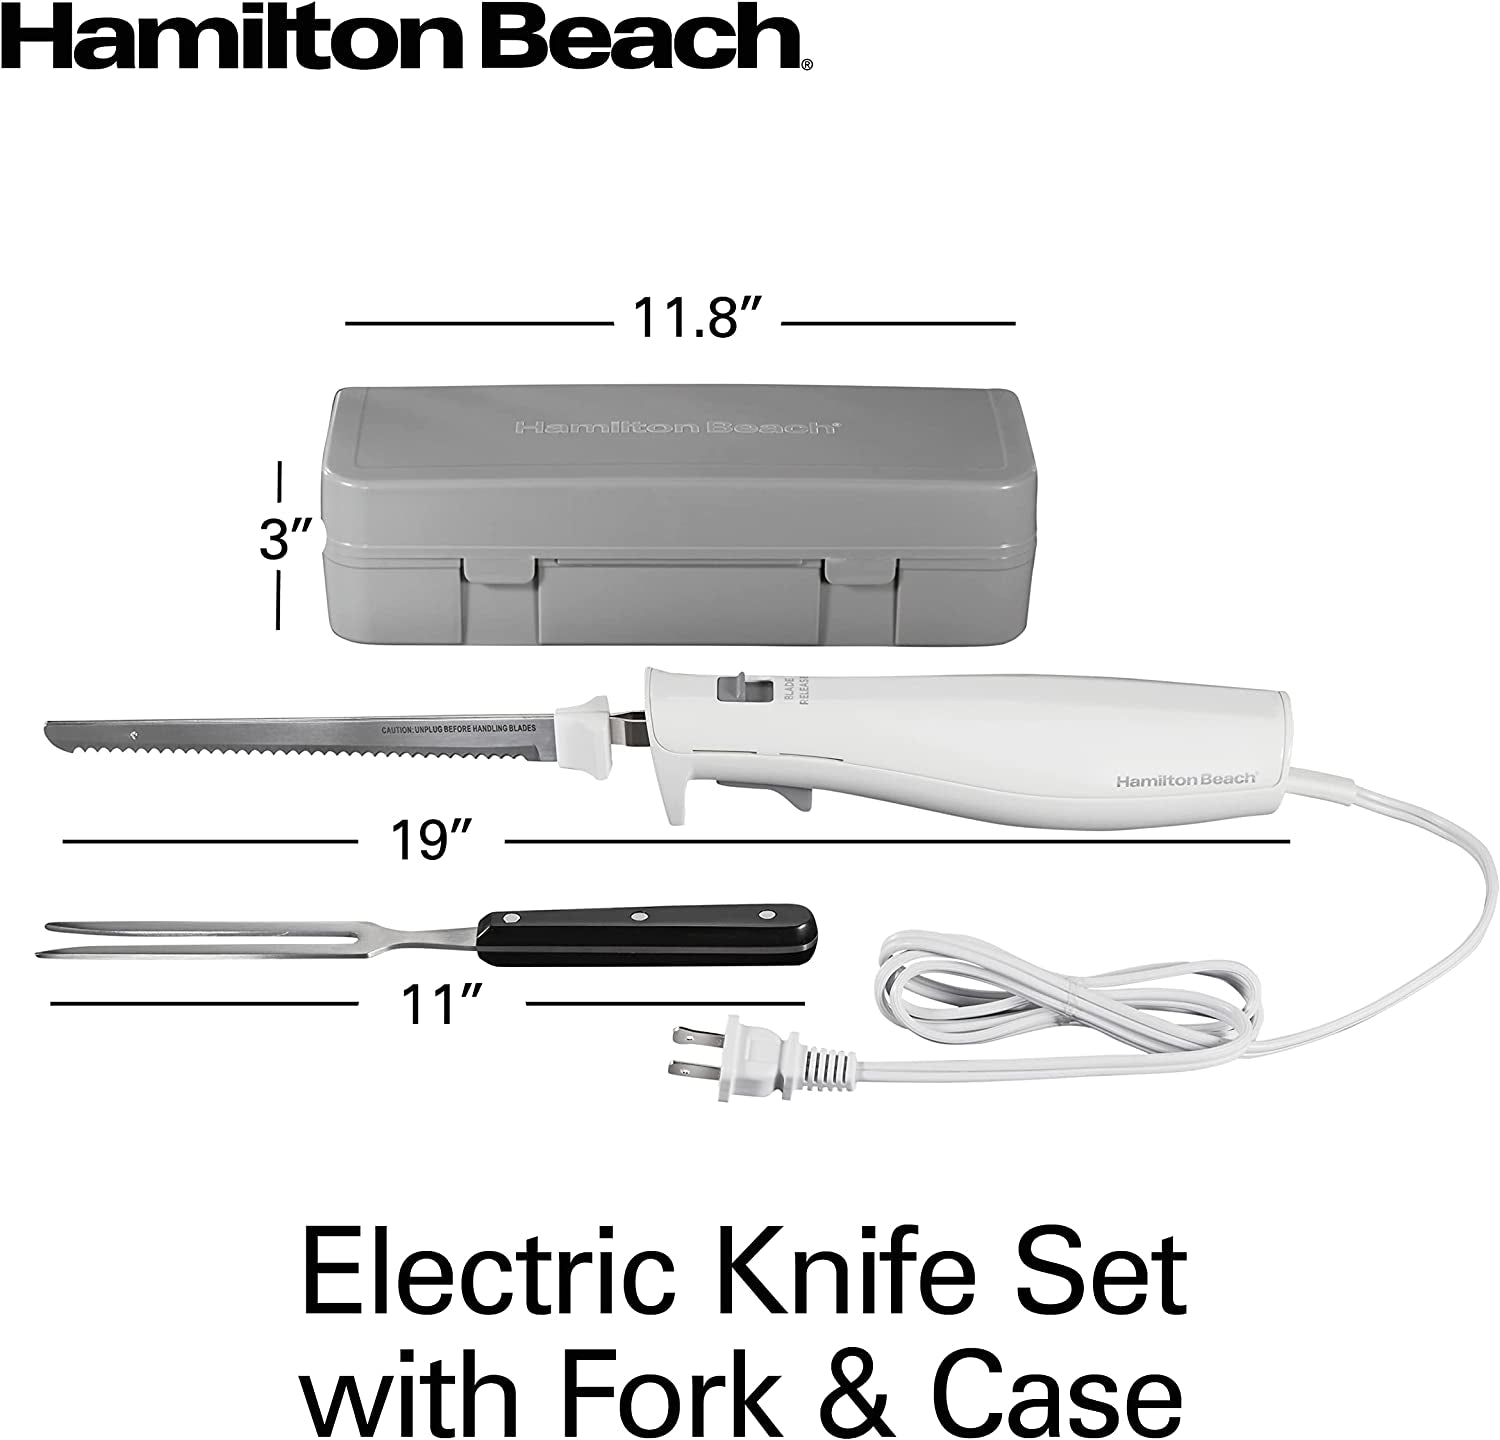 Electric Knife Set for Carving Meats, Poultry, Bread, Crafting Foam & More, Reciprocating Serrated Stainless Steel Blades, Ergonomic Design Storage Case + Fork Included, 5 Foot Cord